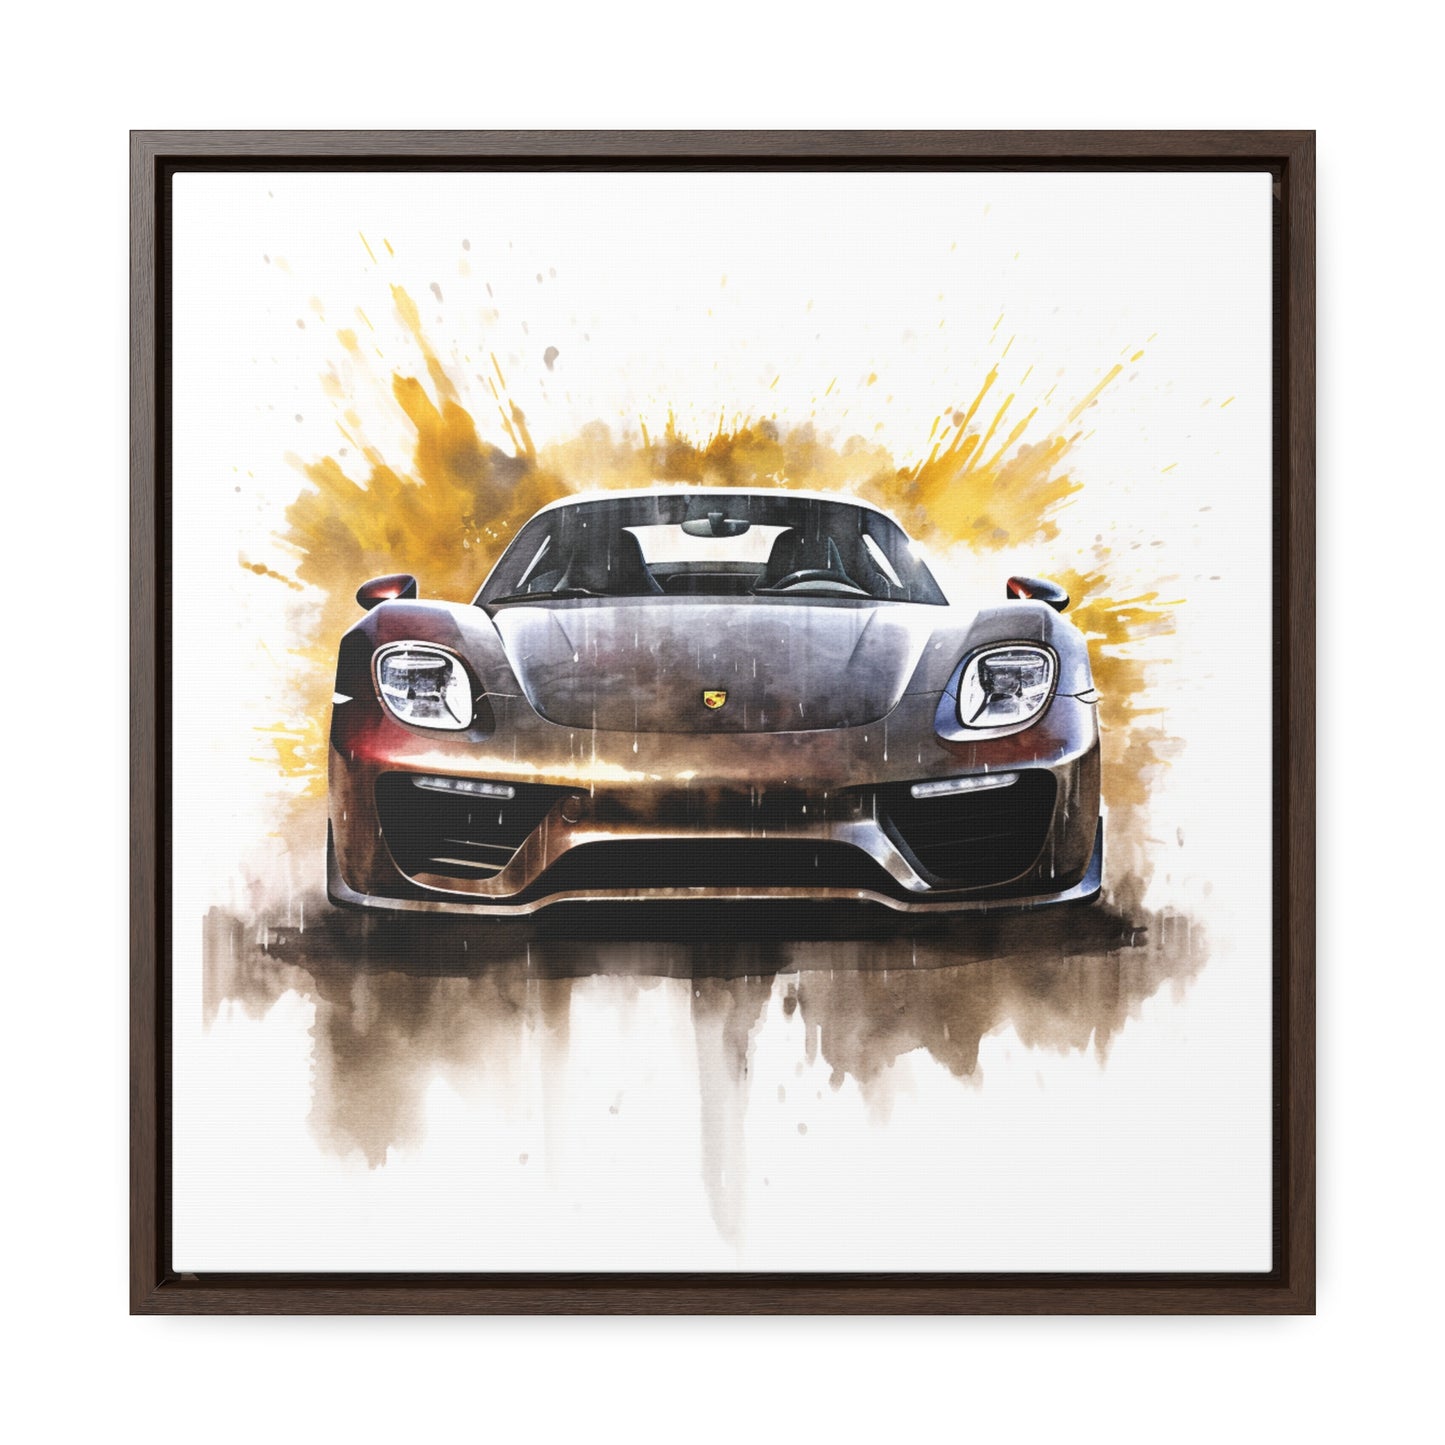 Gallery Canvas Wraps, Square Frame 918 Spyder white background driving fast with water splashing 1